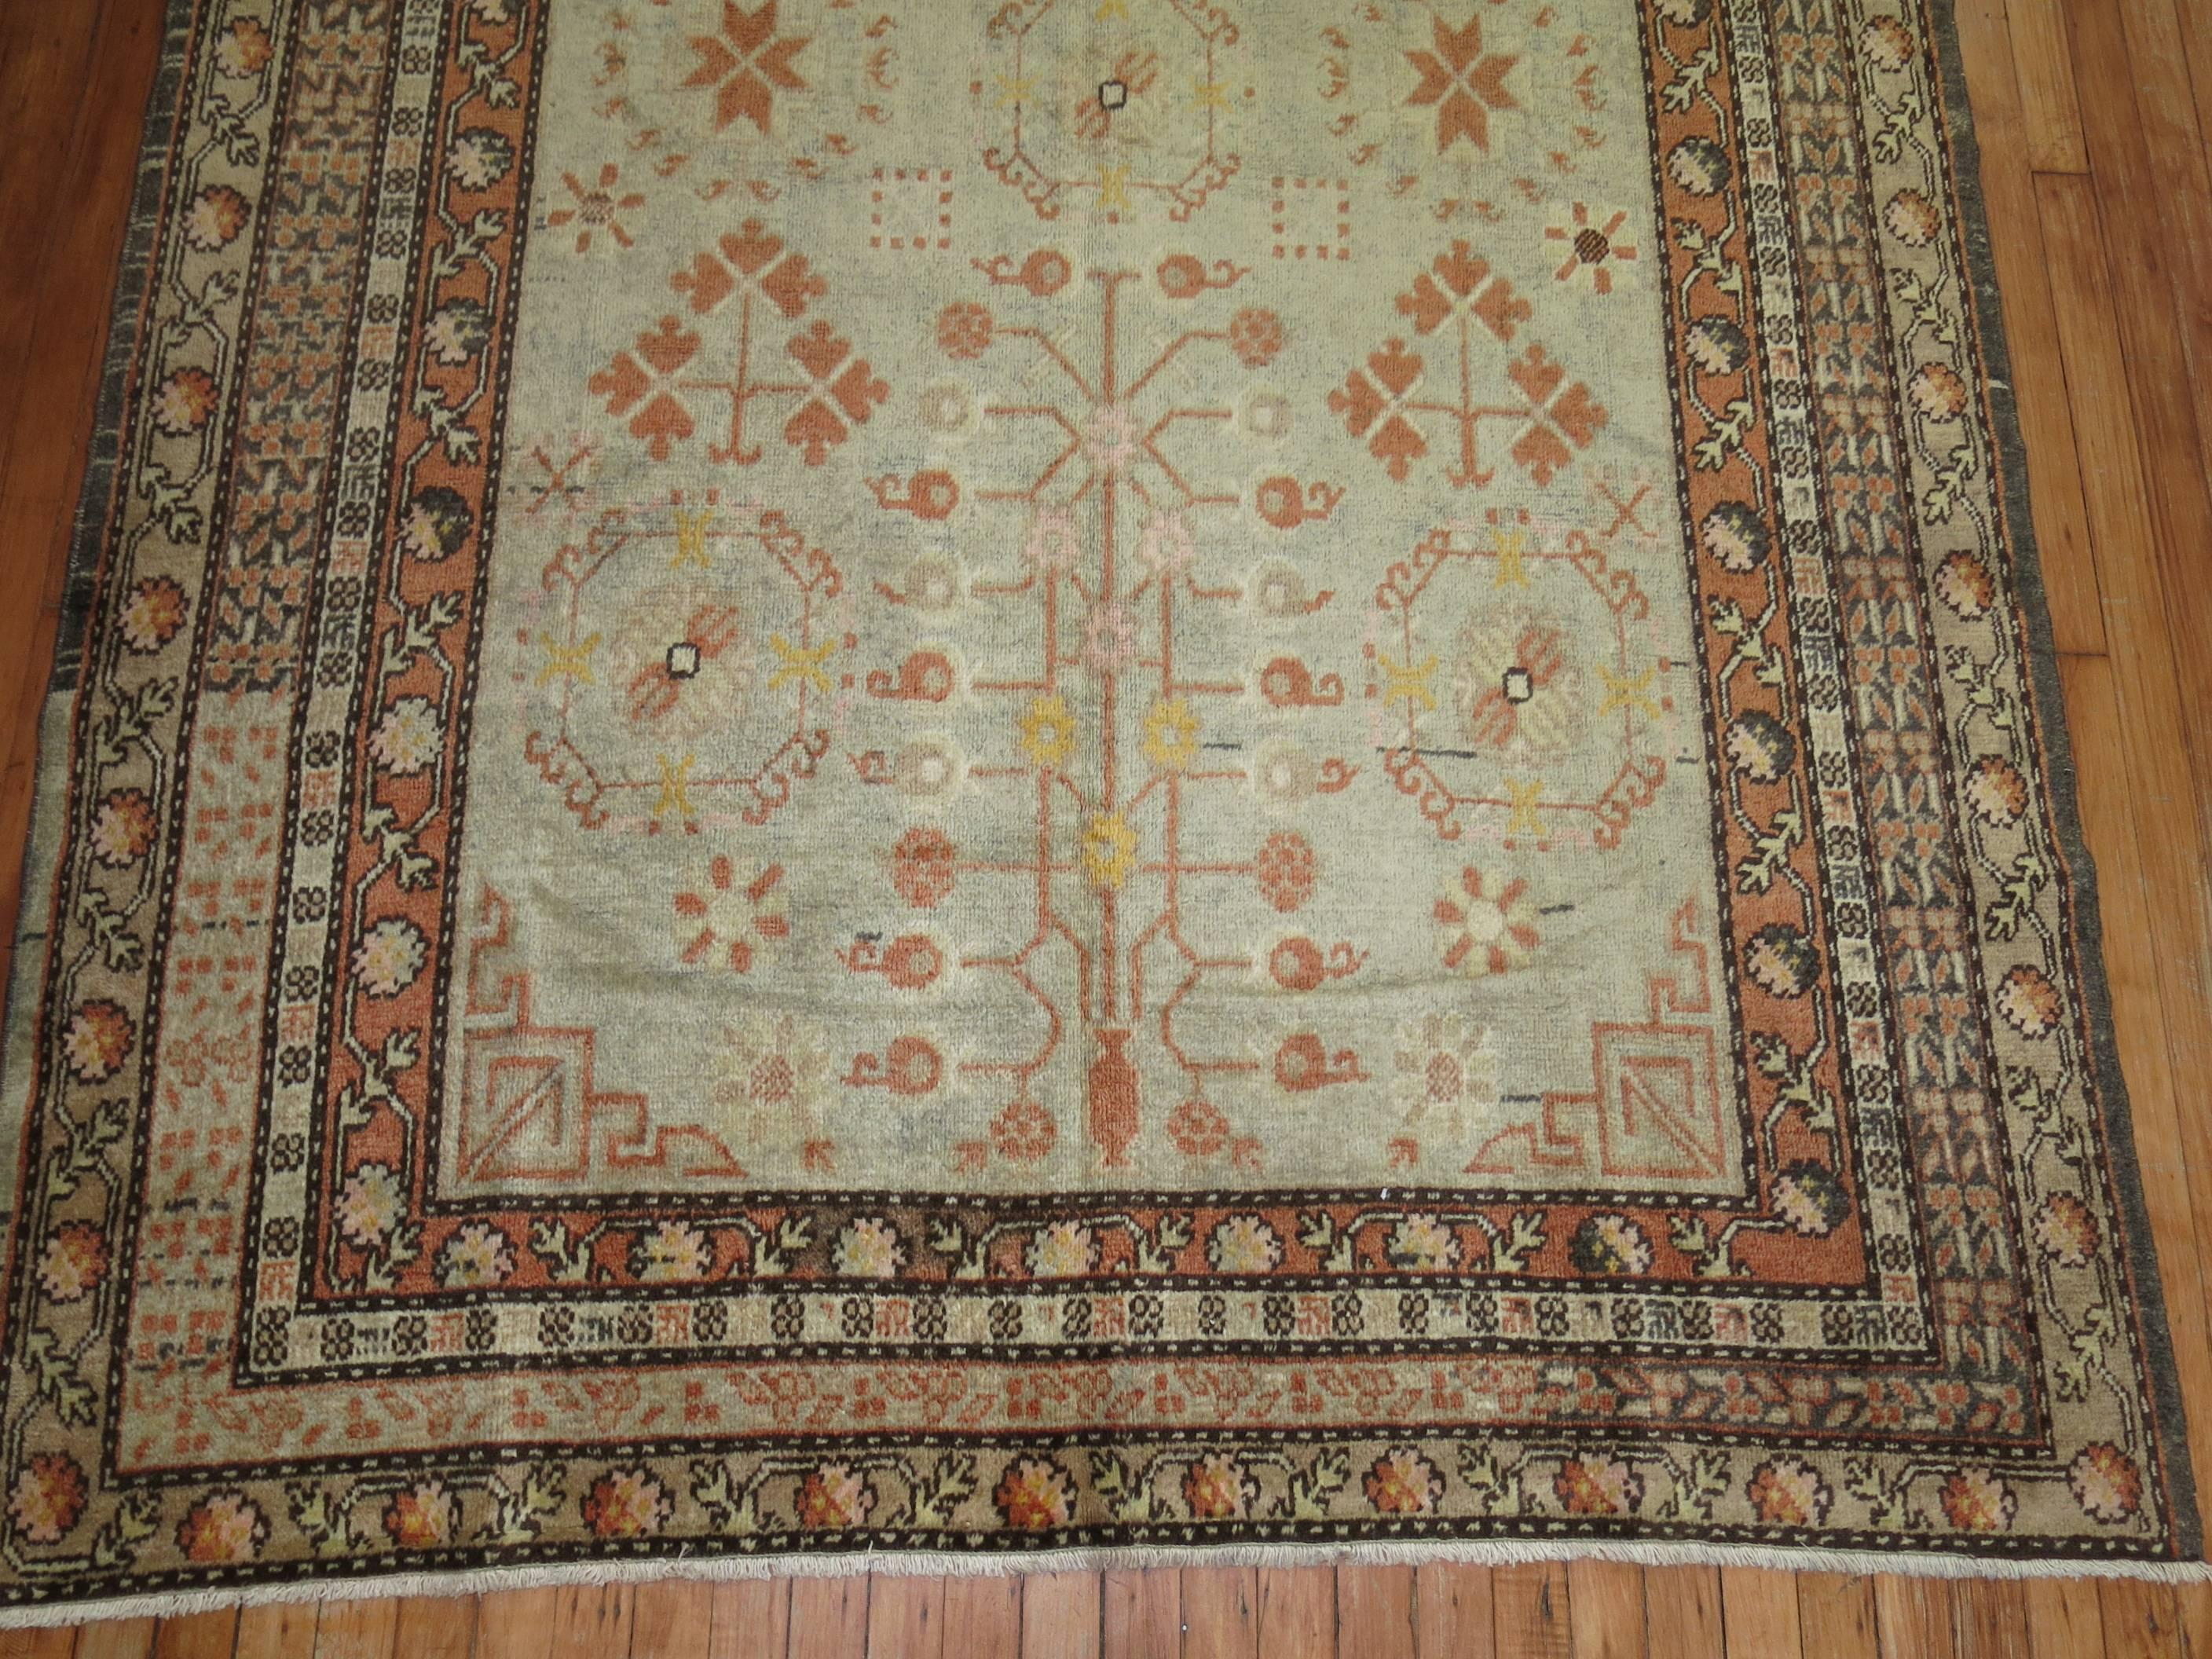 Authentic early 20th century Khotan rug with repetitive pomegranate motif on an ivory ground. Dominant accents in apricot and brown, circa 1920

Measures: 5'9